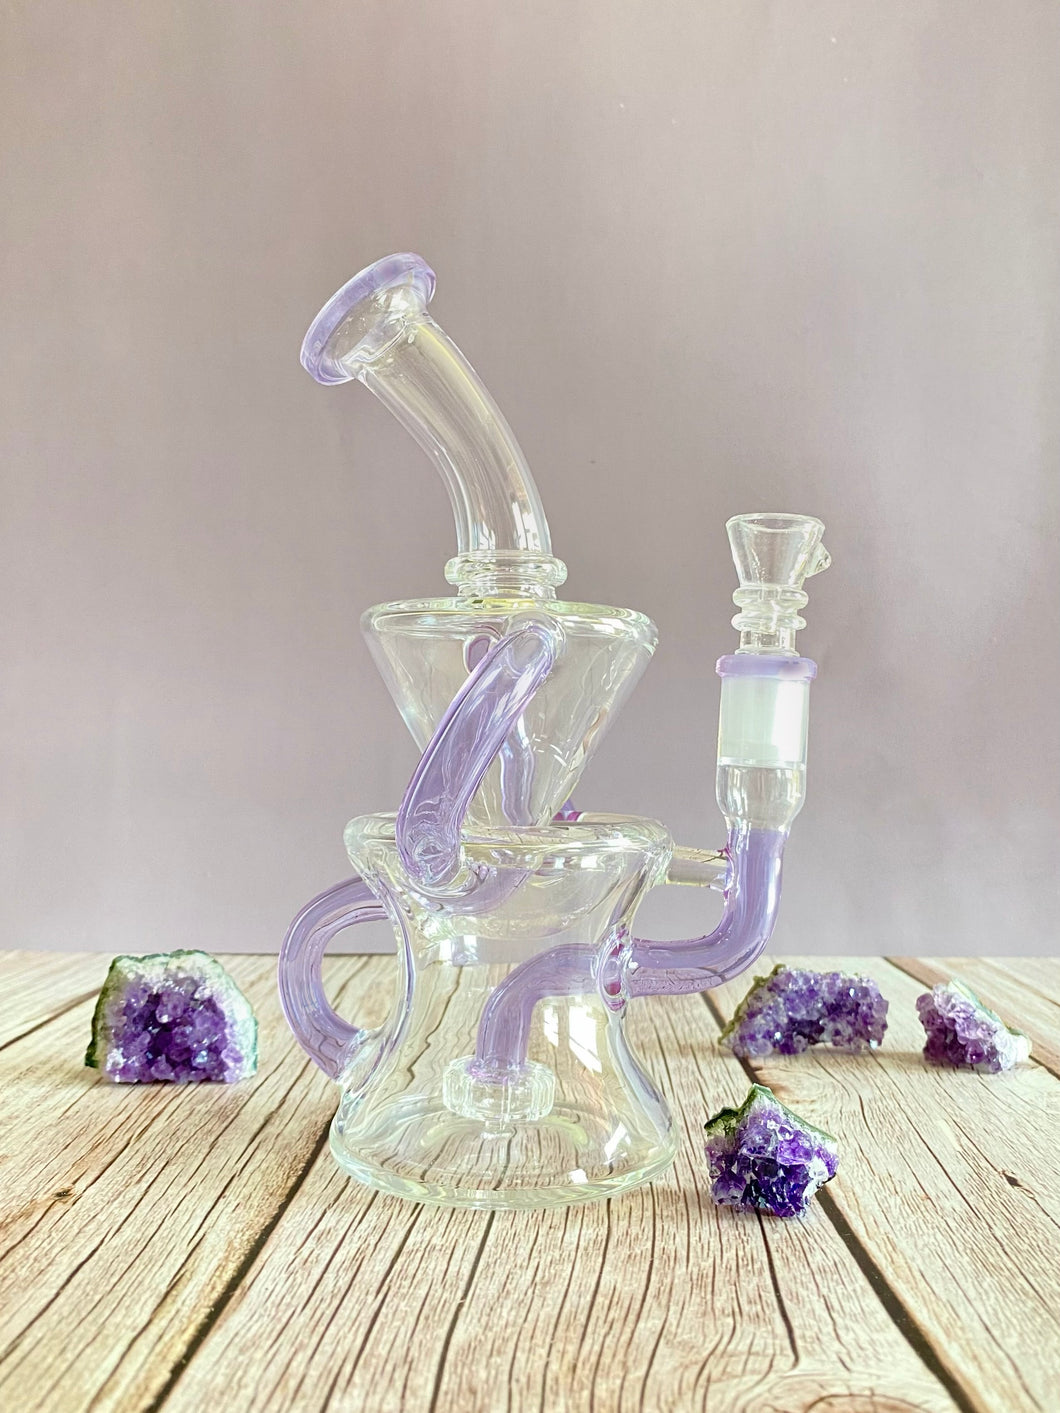 recycler with clear purple accents